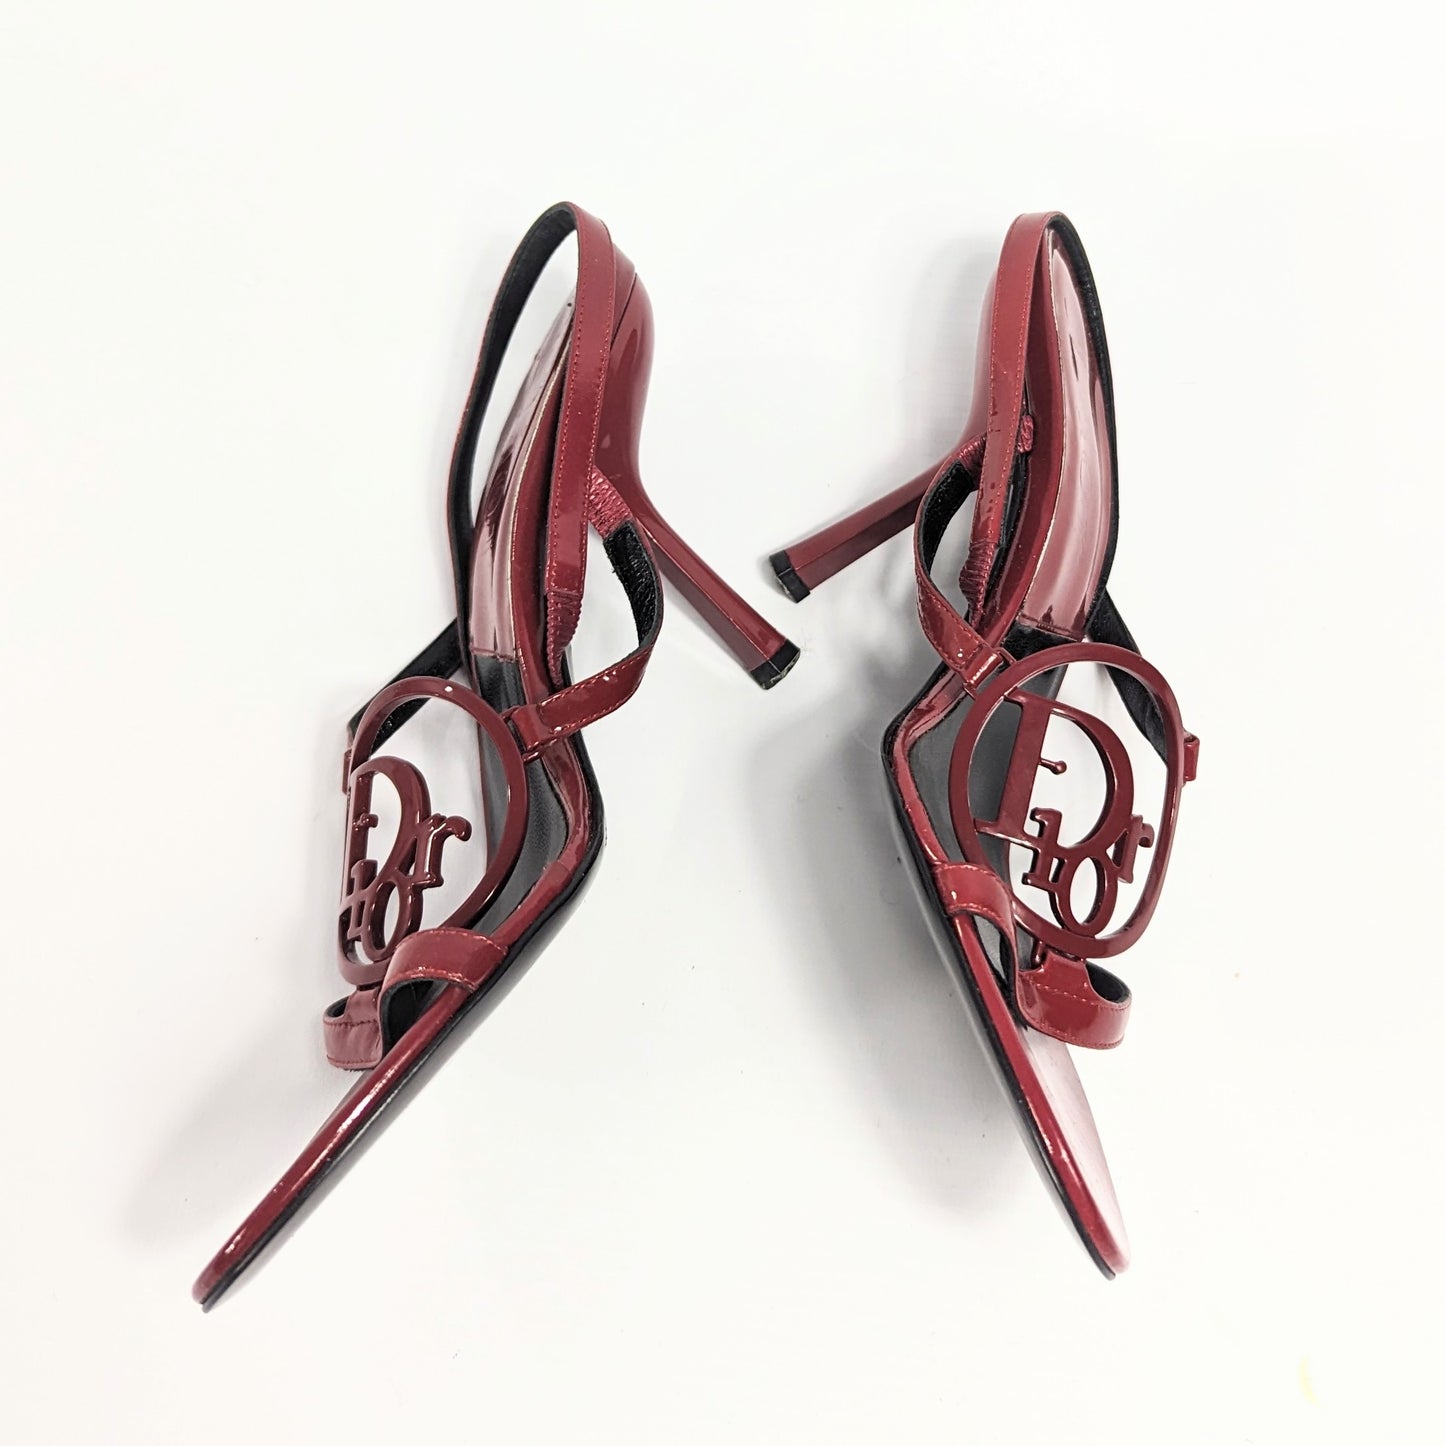 Red patent sandals with Dior logo by Galliano -EU36|UK3,5|US5,5